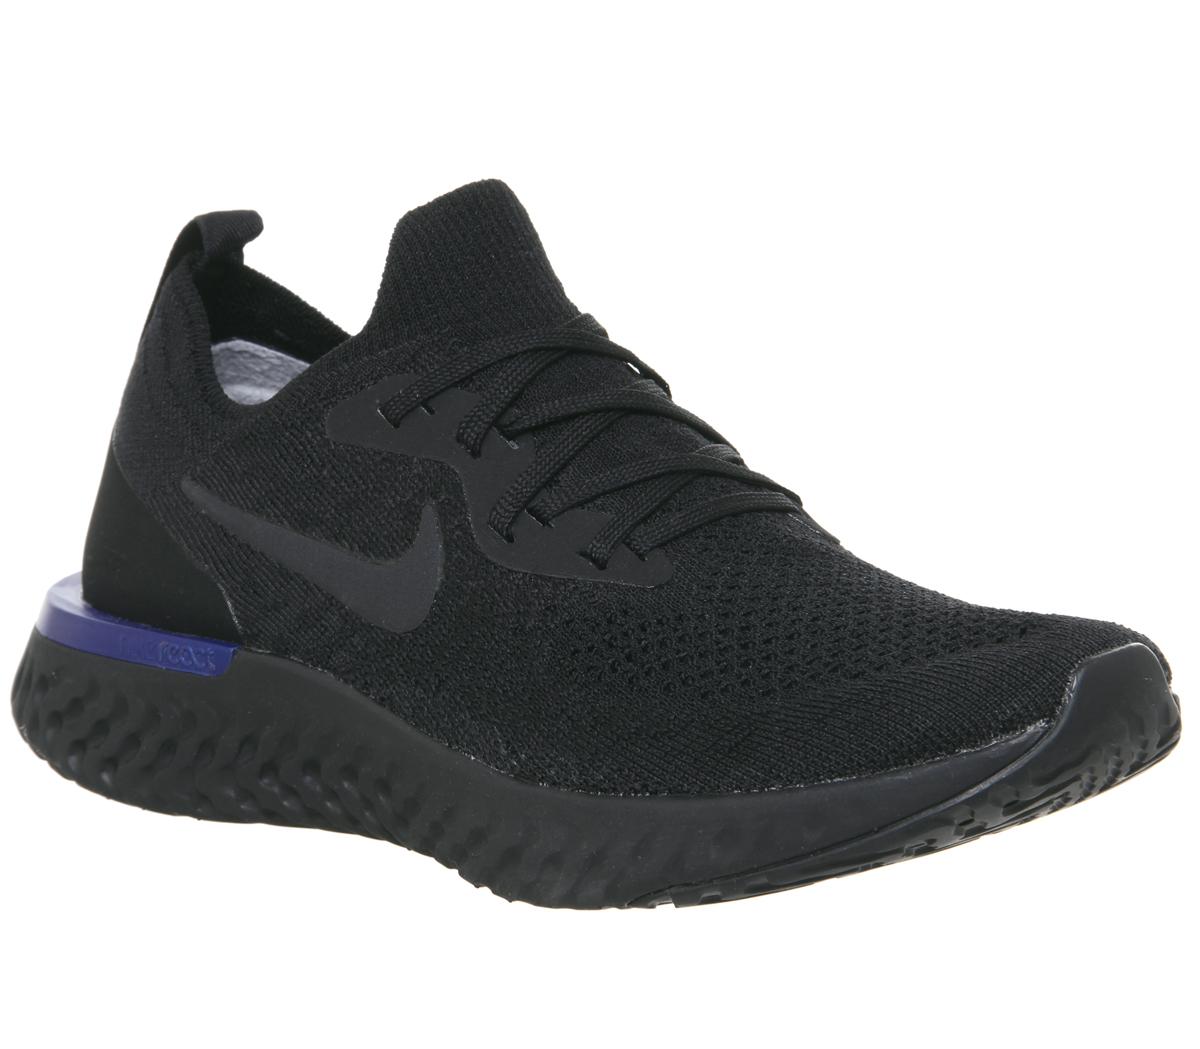 nike running epic react trainers in black